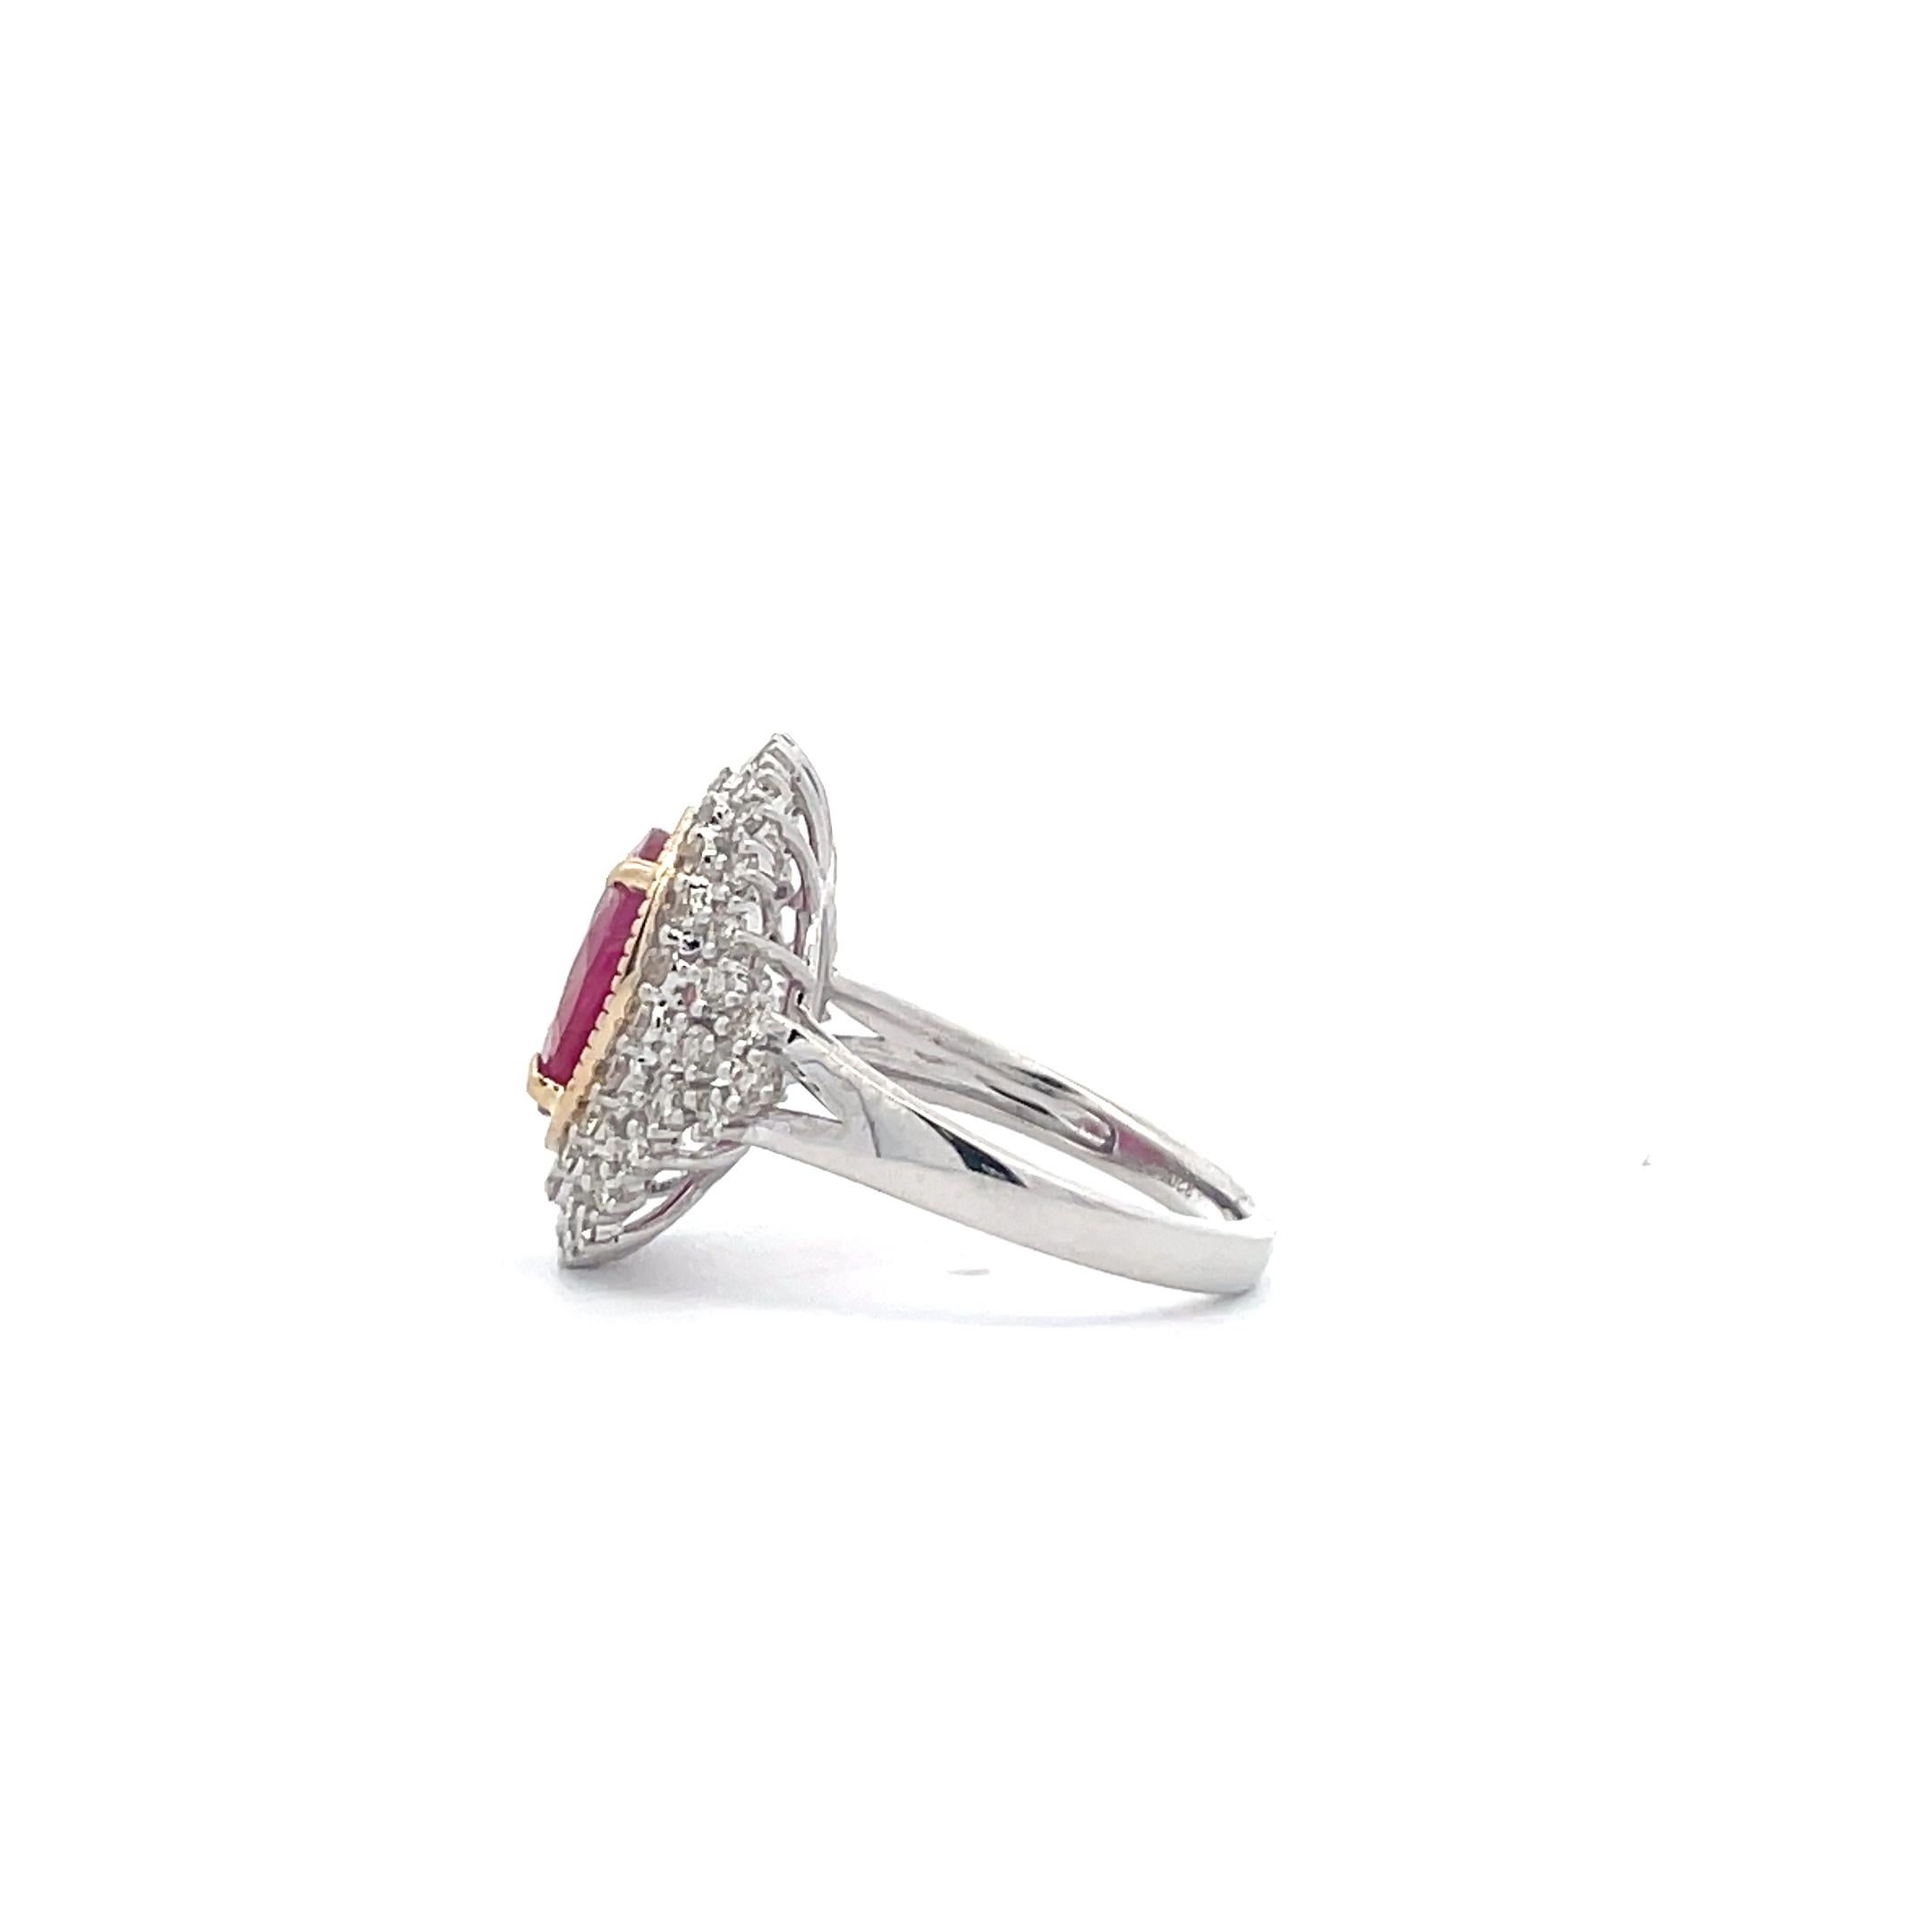 Let the fire of this Oval Ruby & Diamond Halo Ring warm your heart. Crafted by professional artisans with a passion for detail, it features a 3.25 CT oval ruby surrounded by diamond halo prongs and an intricate sophisticated design. This ring is